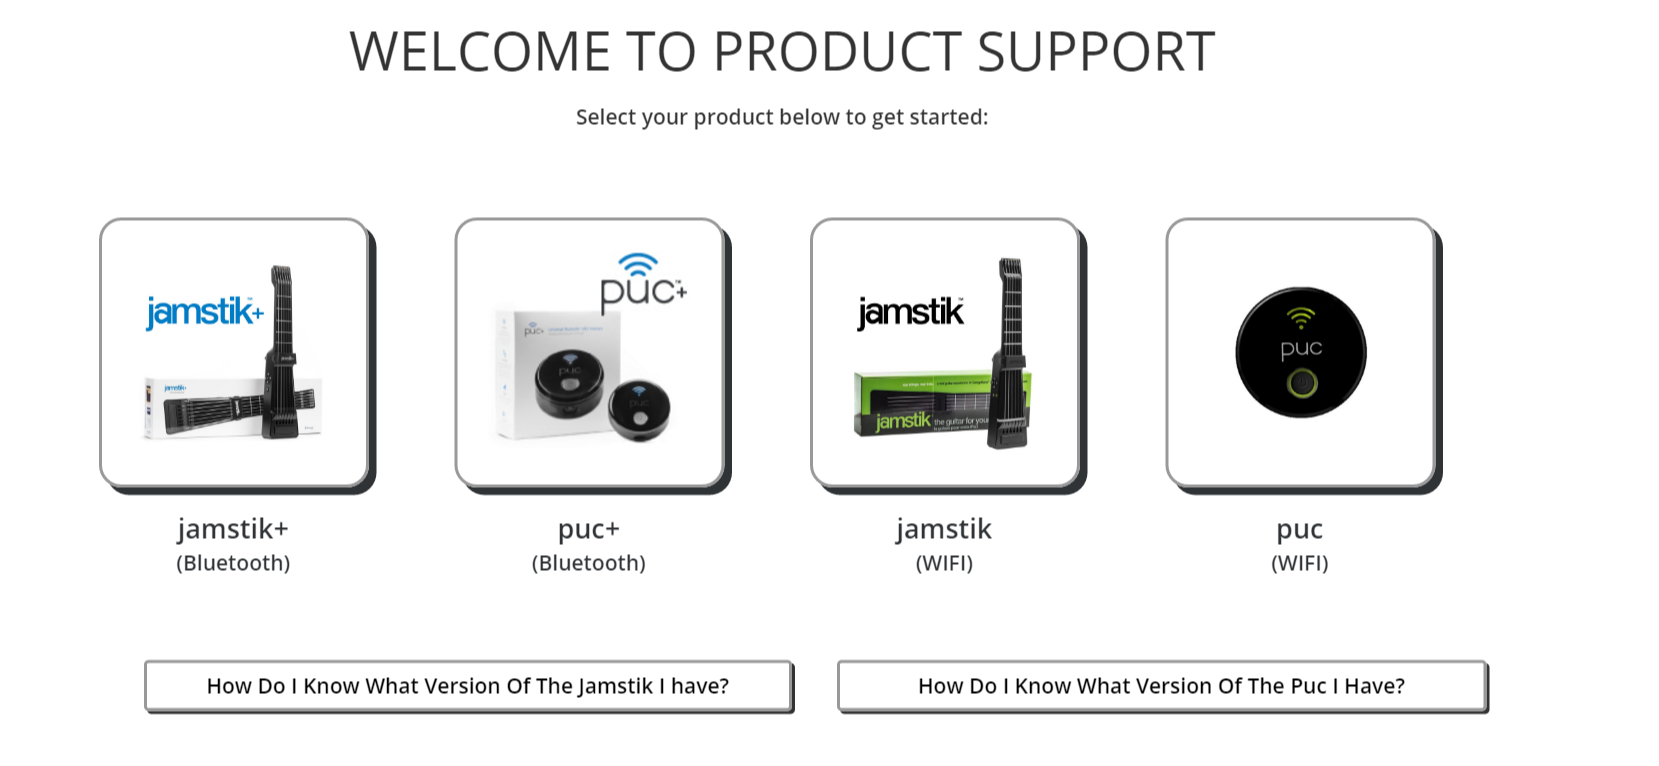 product support for jamstik